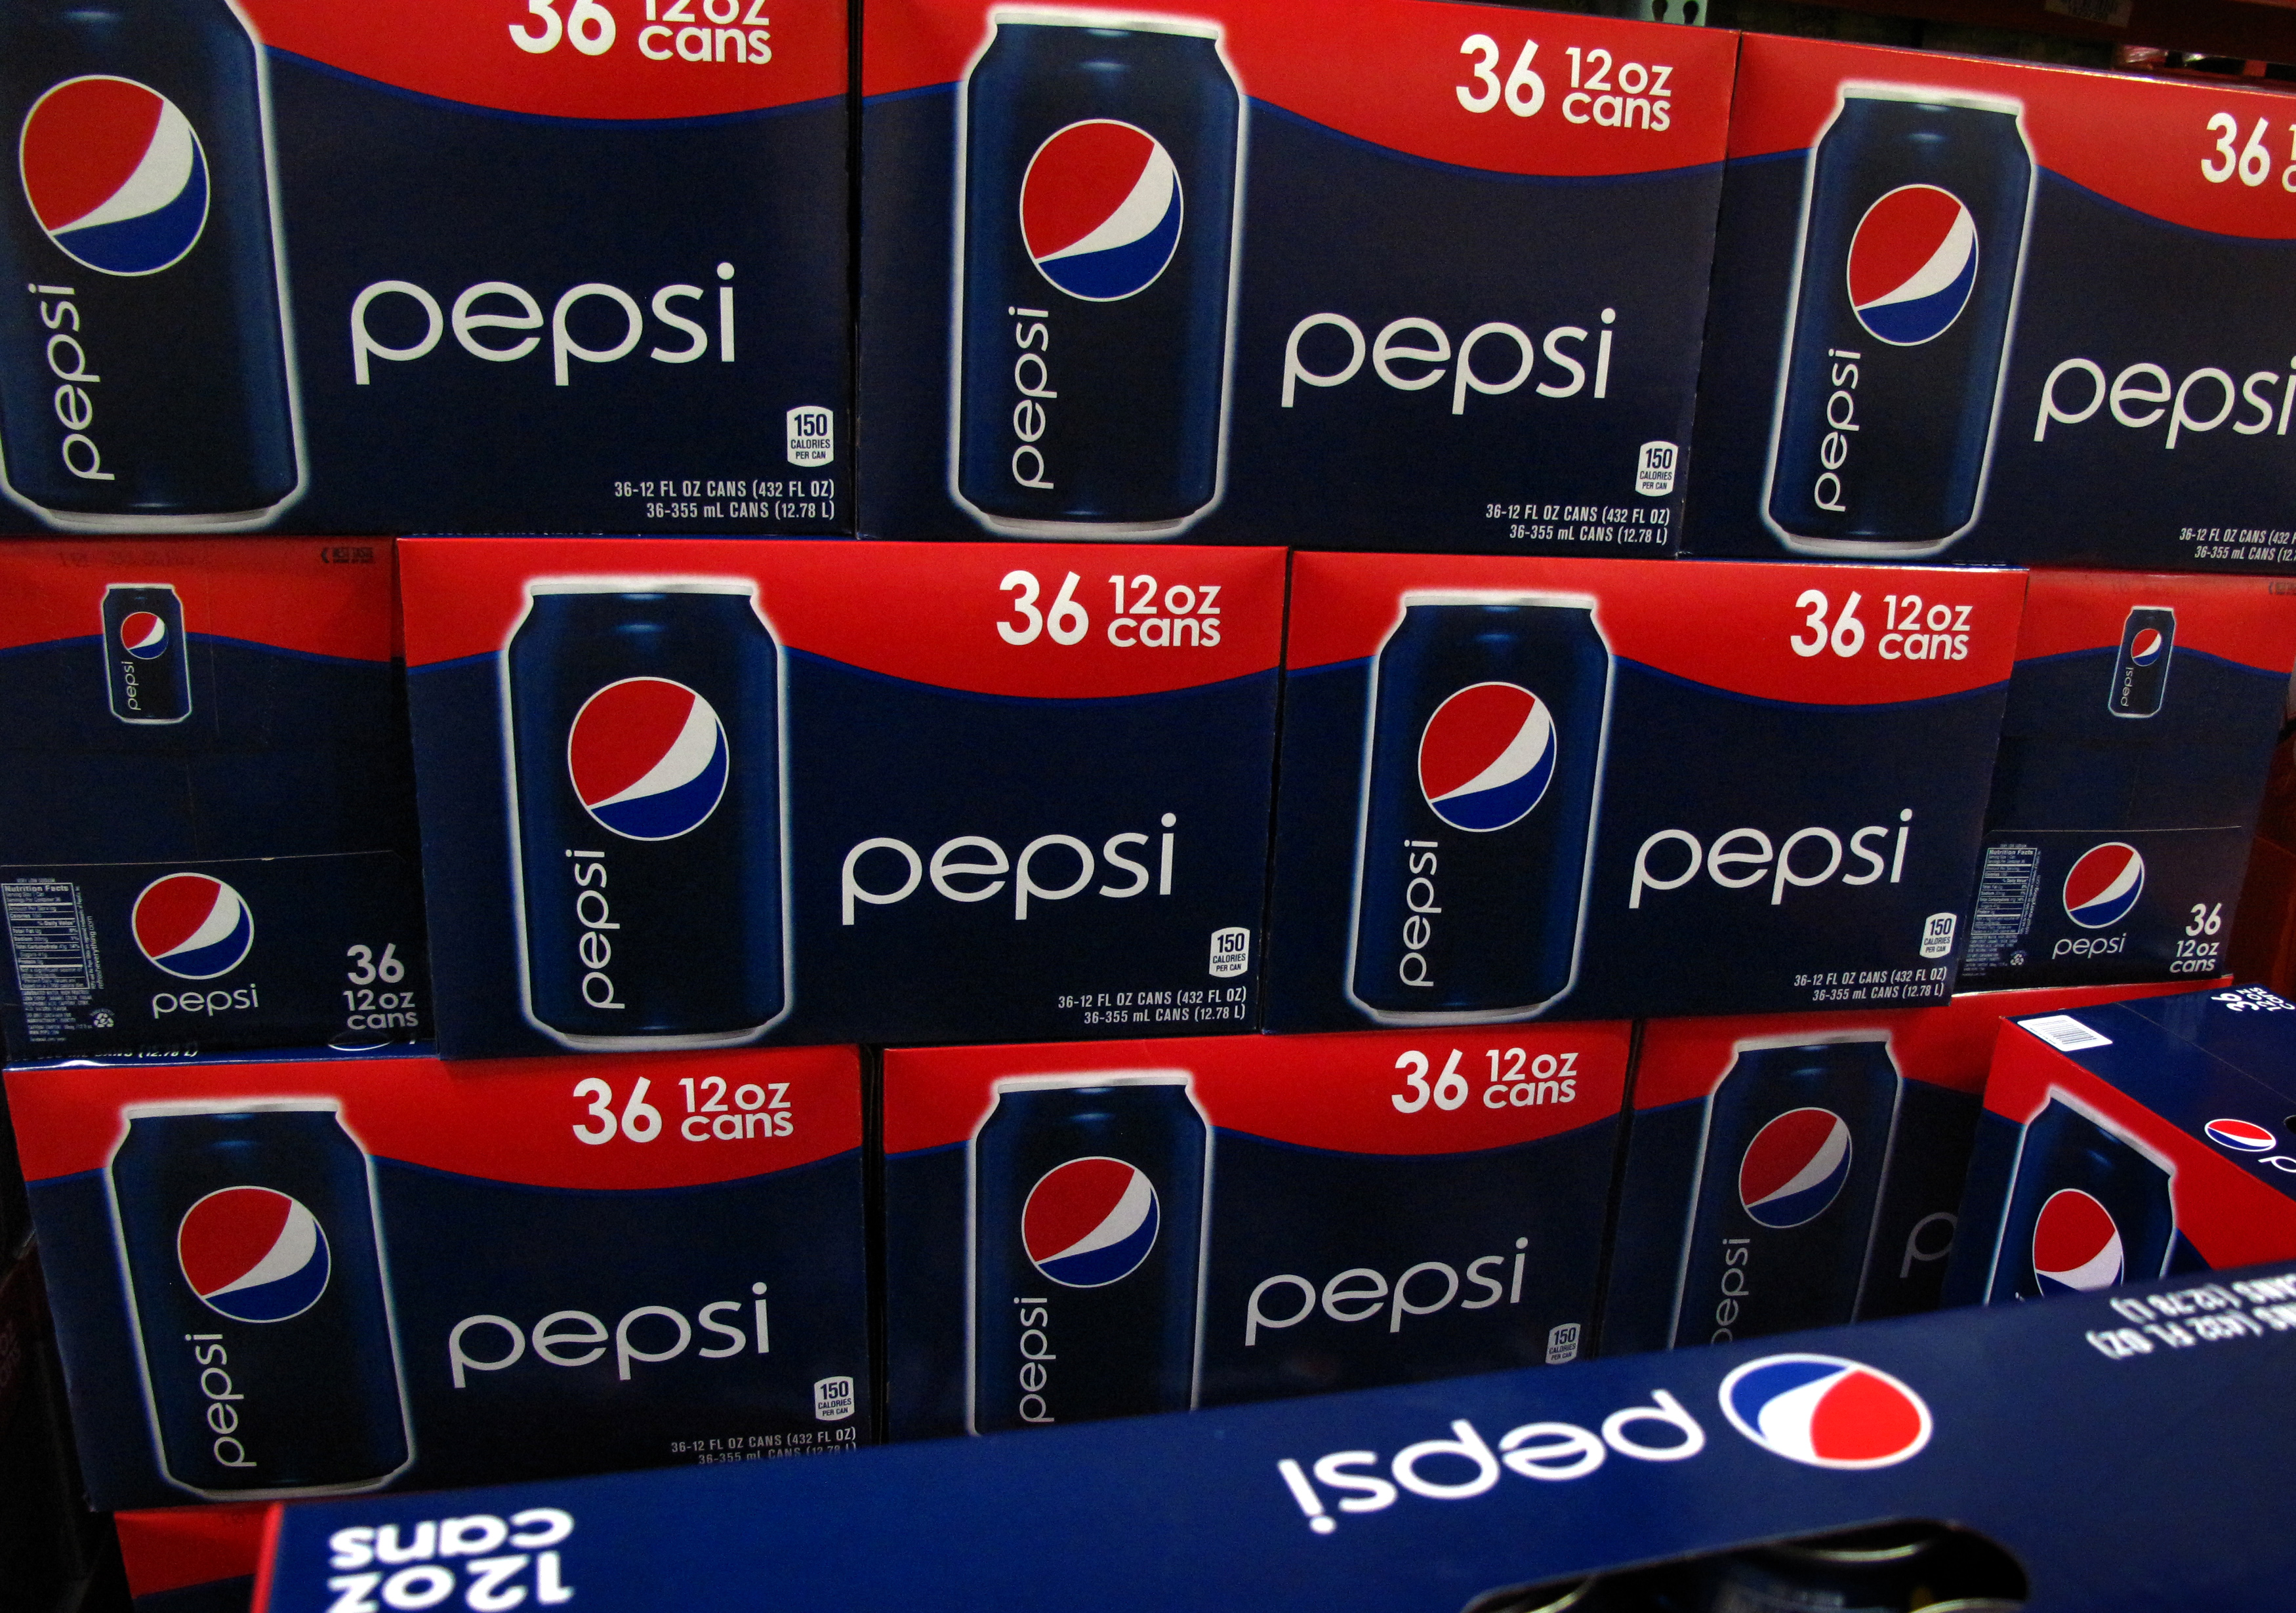 Cases of Pepsi are displayed for sale in Carlsbad, California February 7, 2012. PepsiCo Inc. will report their earnings February 9. REUTERS/Mike Blake 